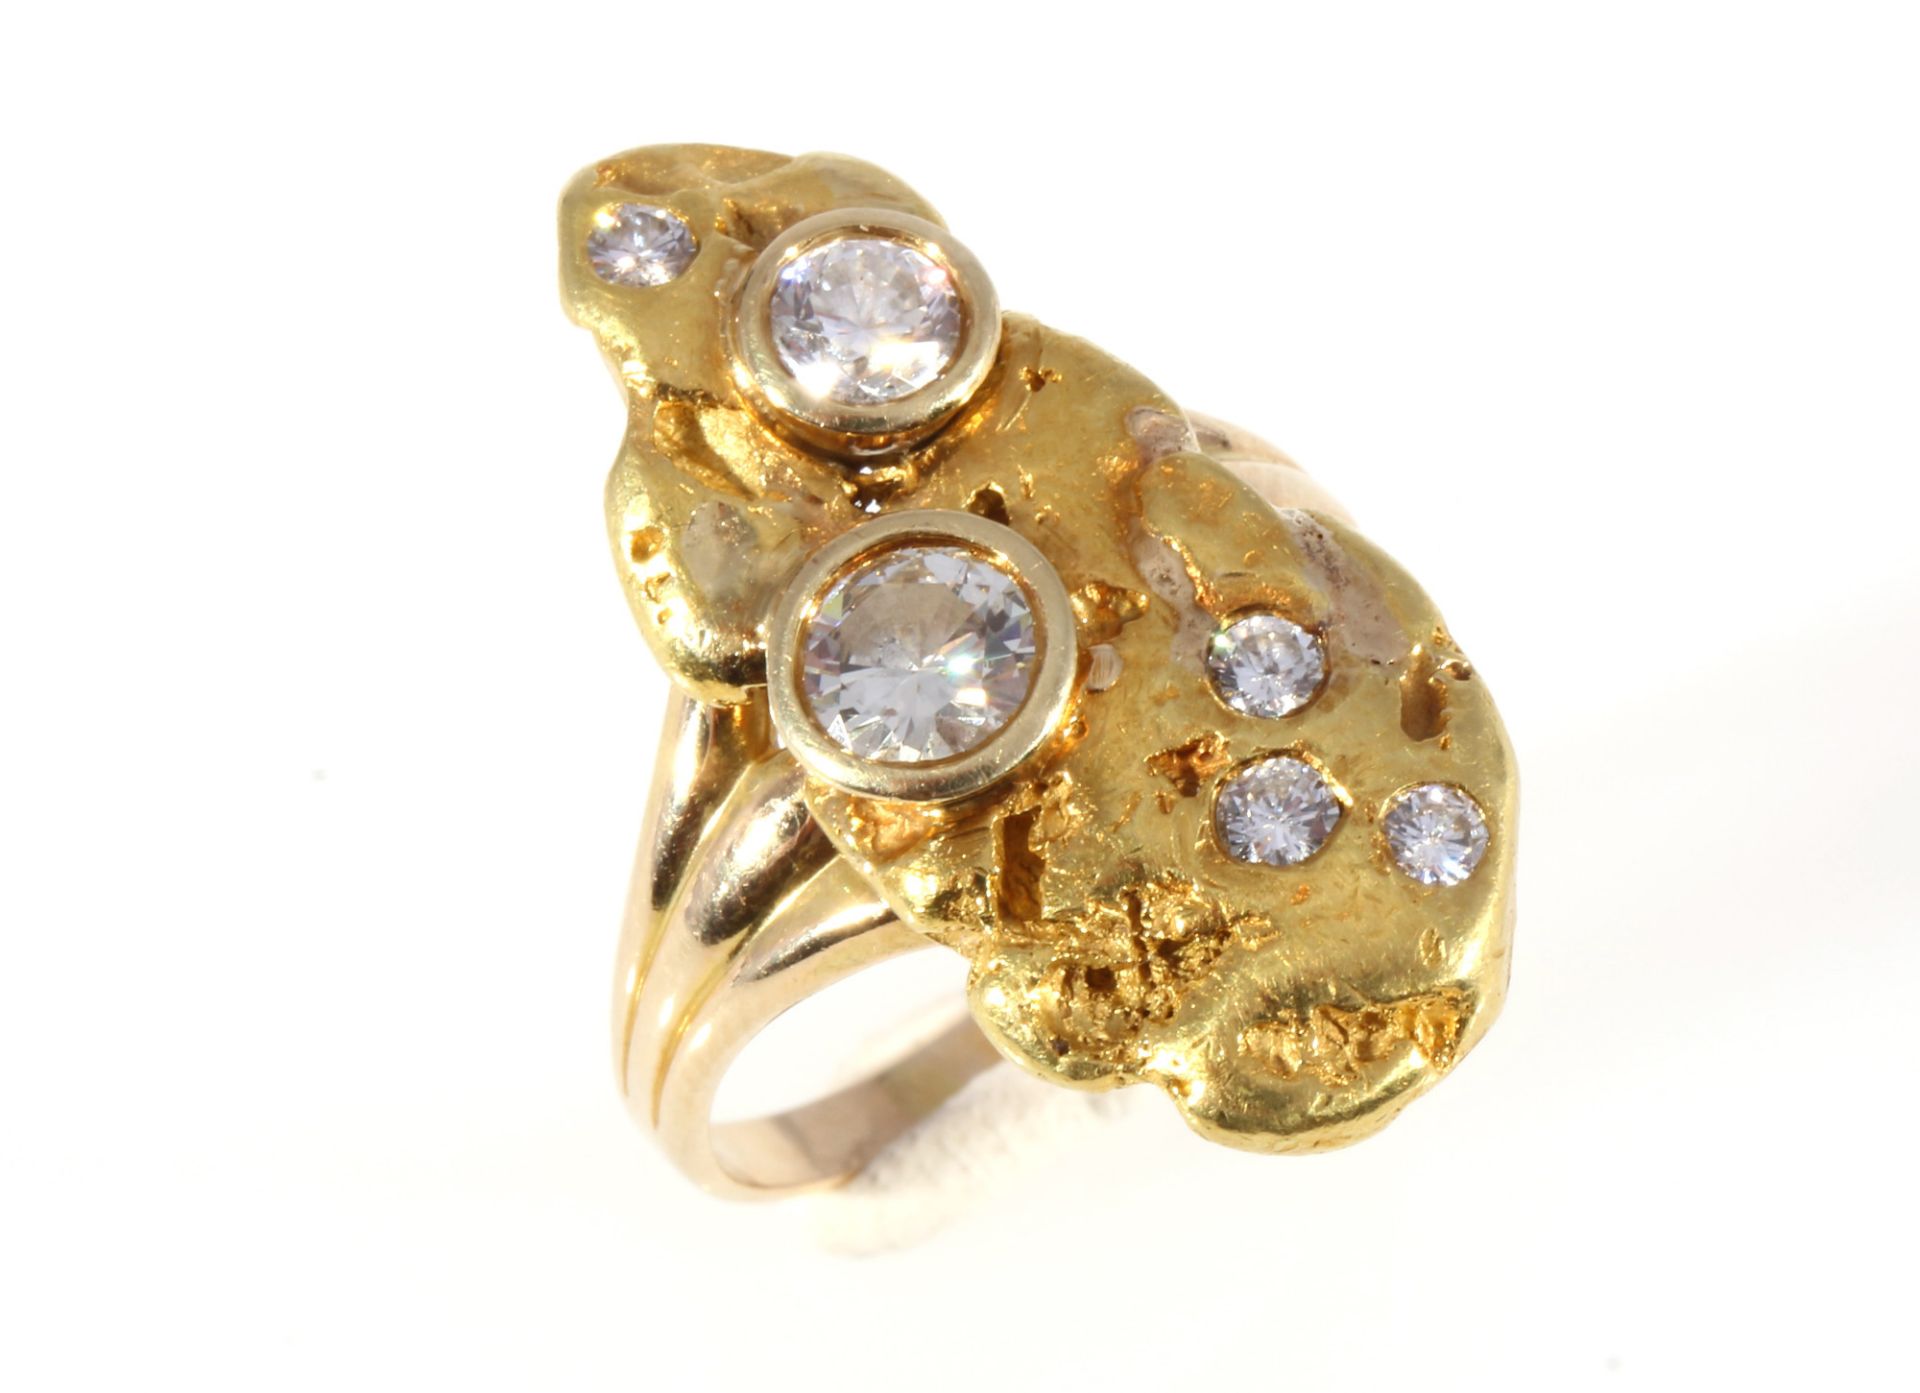 585 Gold Nugget Ring mit Brillanten ca. 0,75ct, 14K gold nugget ring with diamonds 0.75ct,